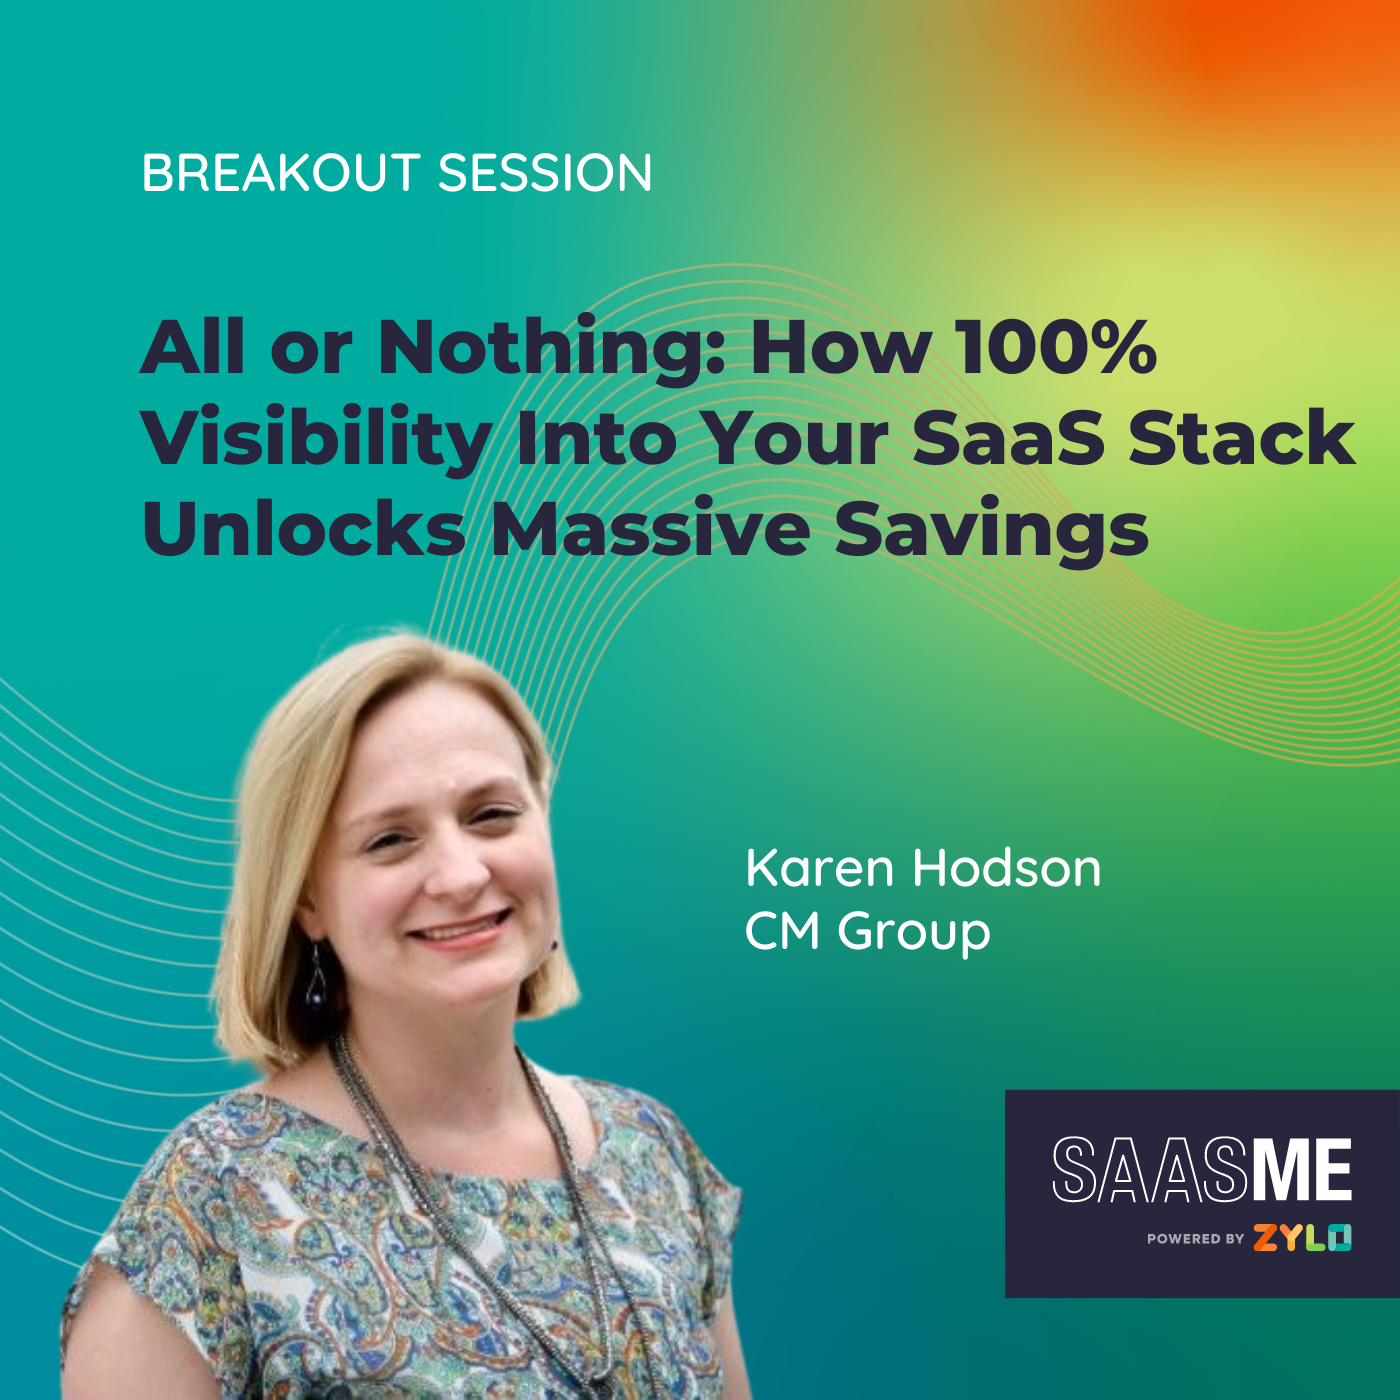 All or Nothing: How 100% Visibility Into Your SaaS Stack Unlocks Massive Savings